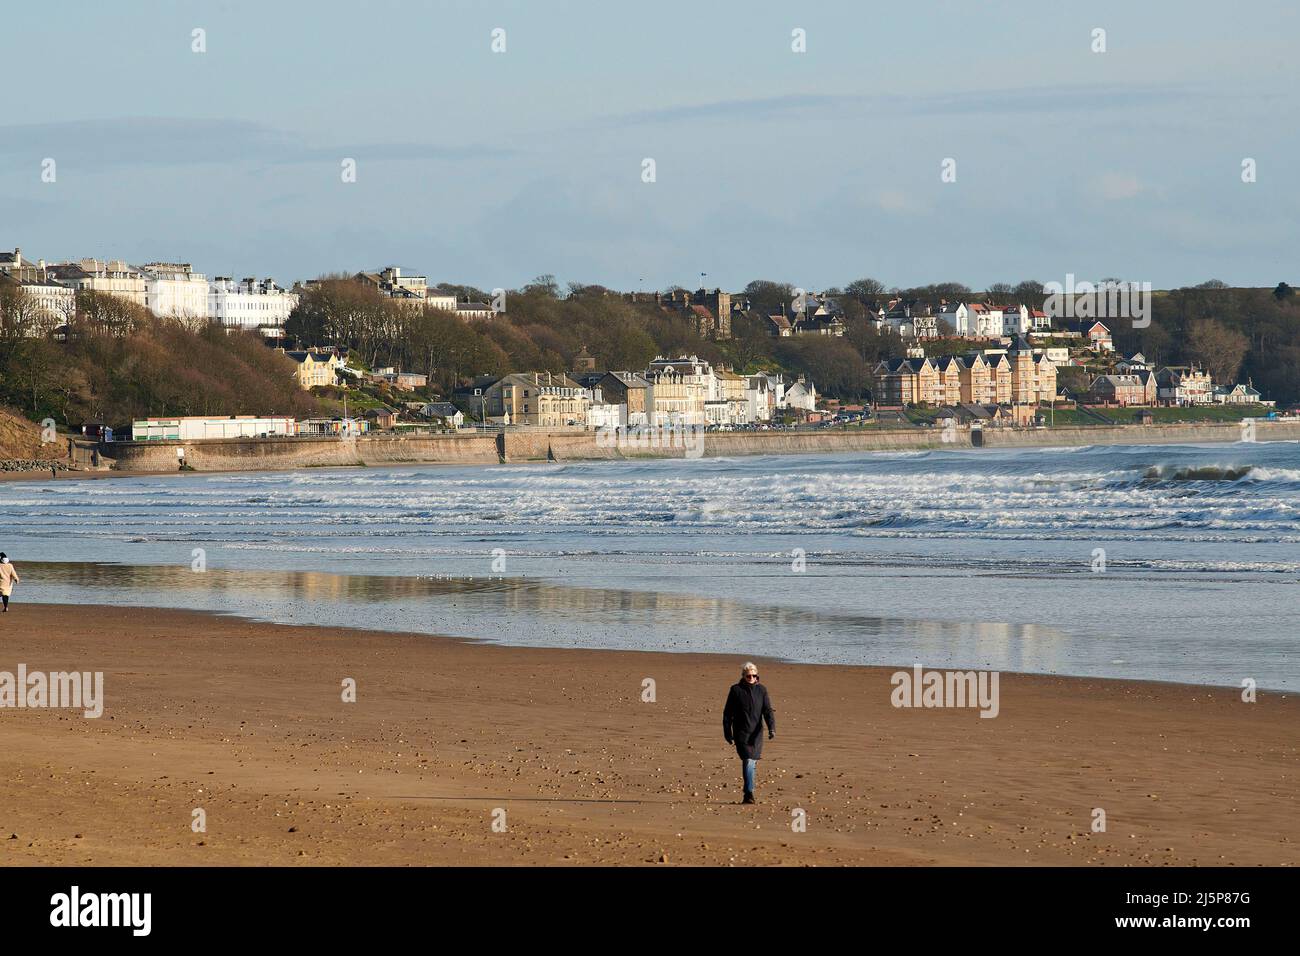 Looking north along the beach to Filey Town, Filey Bay, Yorkshire east coast, northern England, UK Stock Photo